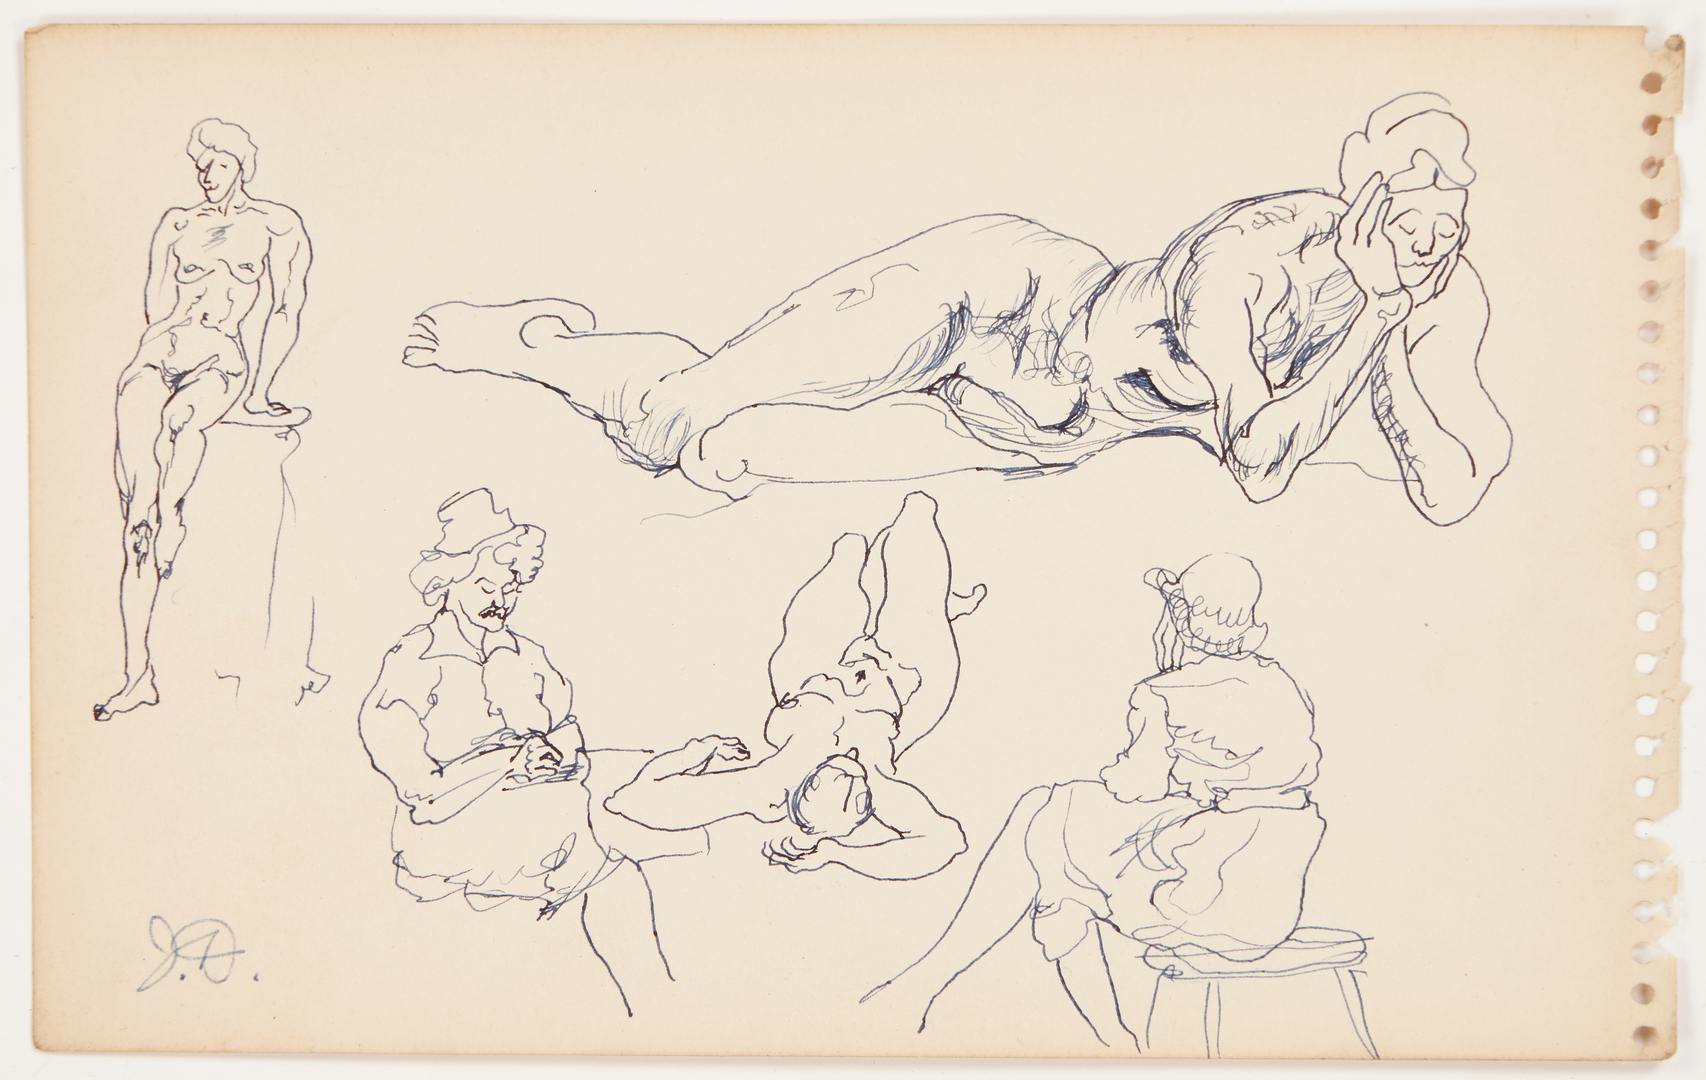 Lot 221: 12 Delaney Related Items, incl. 6 Sketches & Poster